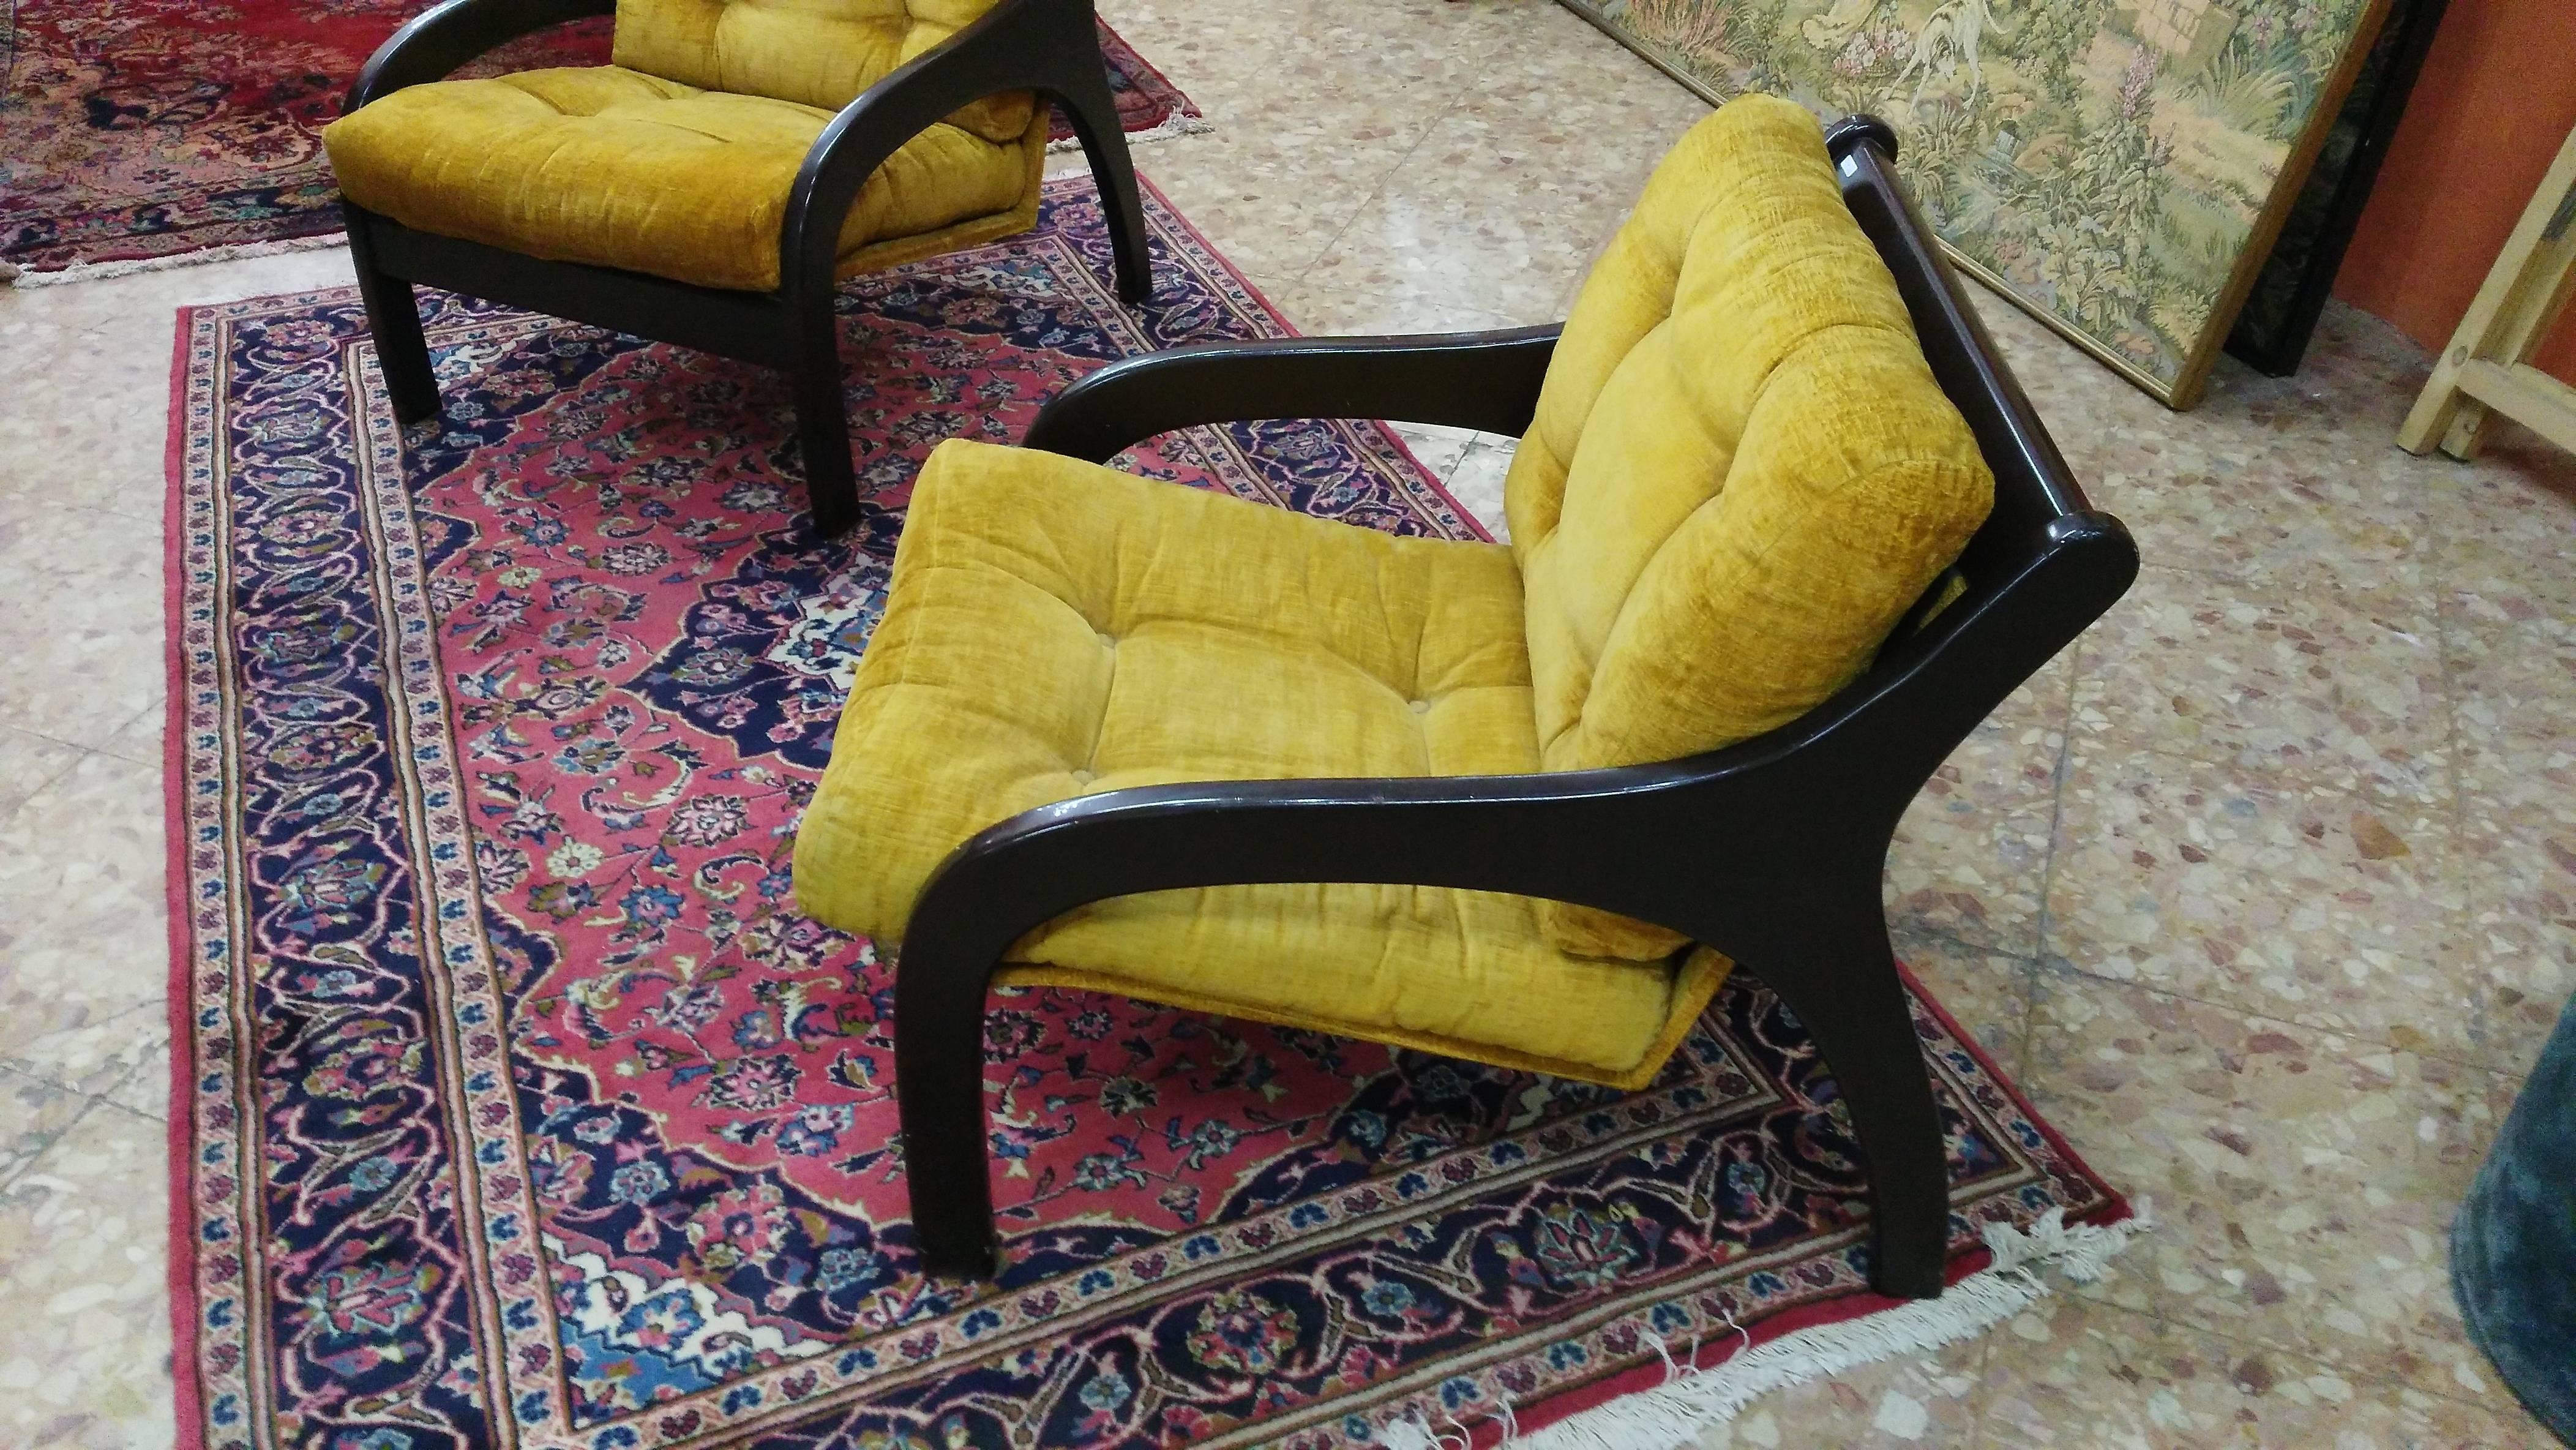 This vintage chair has a wooden structure and a yellow fabric lining. The wooden frame was finished and the cushions were dusted. The chair has large cushions and wooden armrests for added comfort.